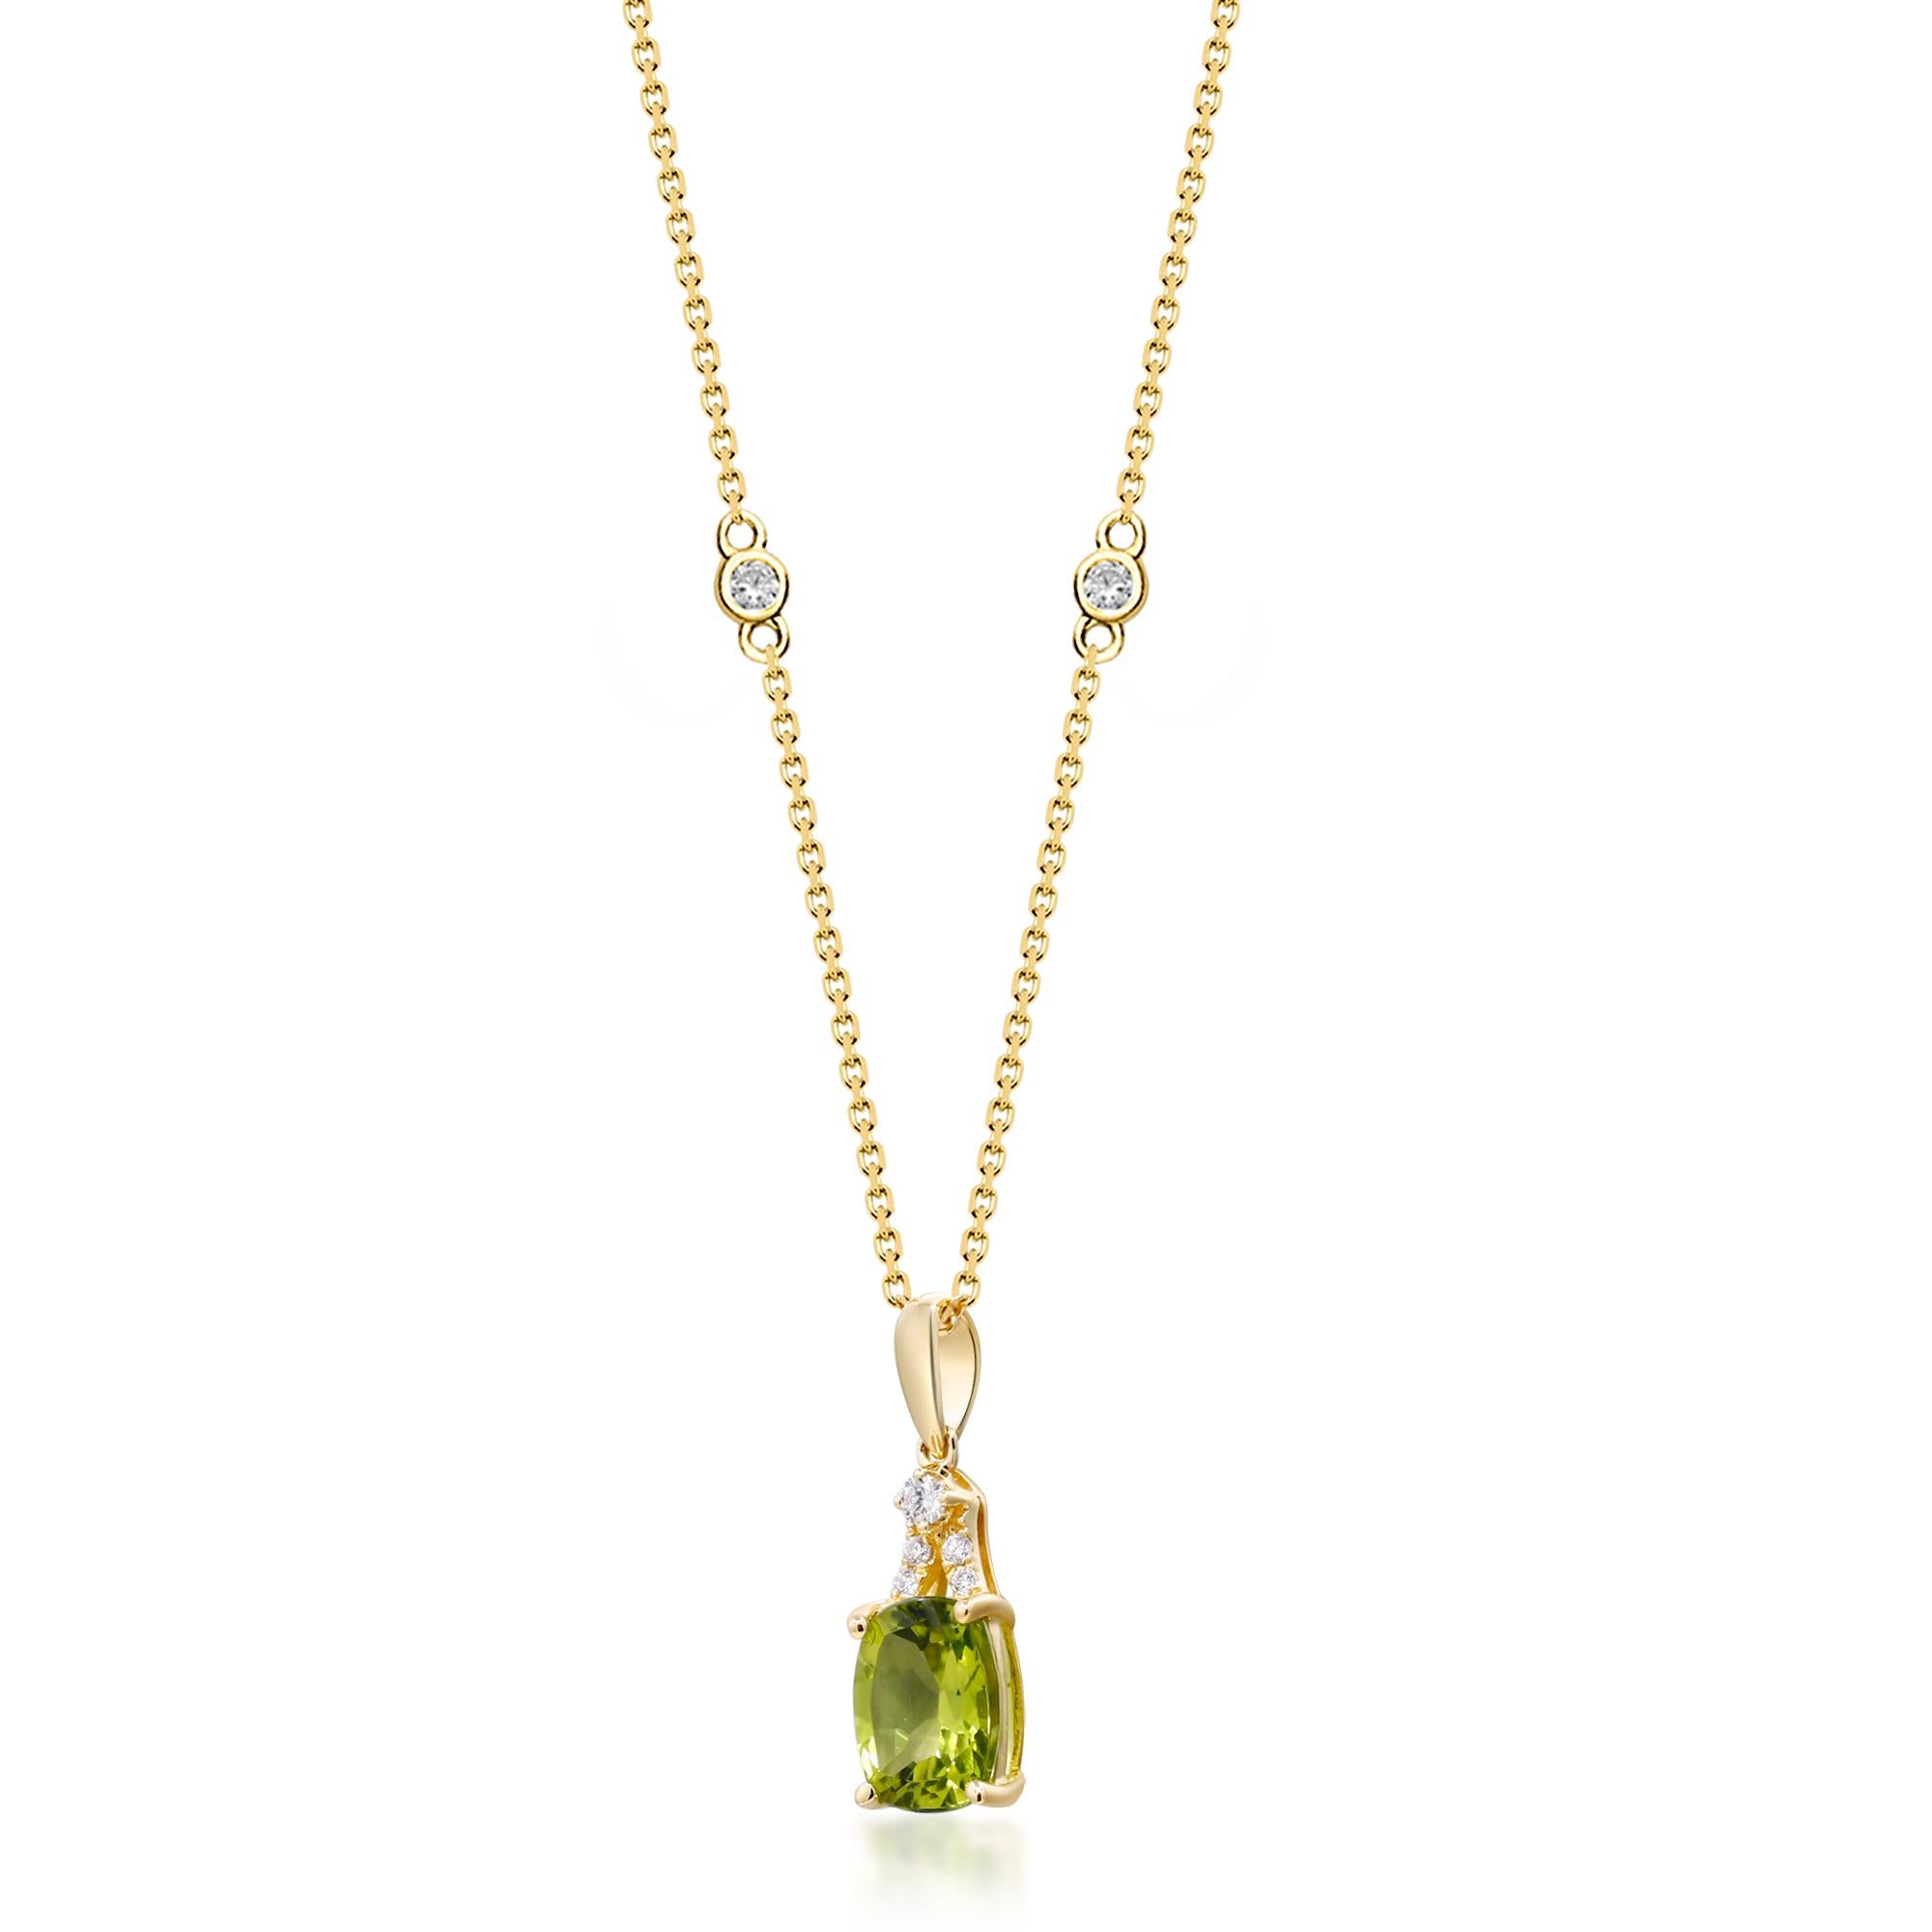 Decorate yourself in elegance with this Pendant crafted from 10-karat Yellow Gold by Gin & Grace. This Pendant is made up of 6*8 mm Peridot Cushion-cut (1 pcs )1.43 carat and Round-cut Diamond (5 Pcs) 0.05 carat. This Pendant weighs 1.81 grams. This